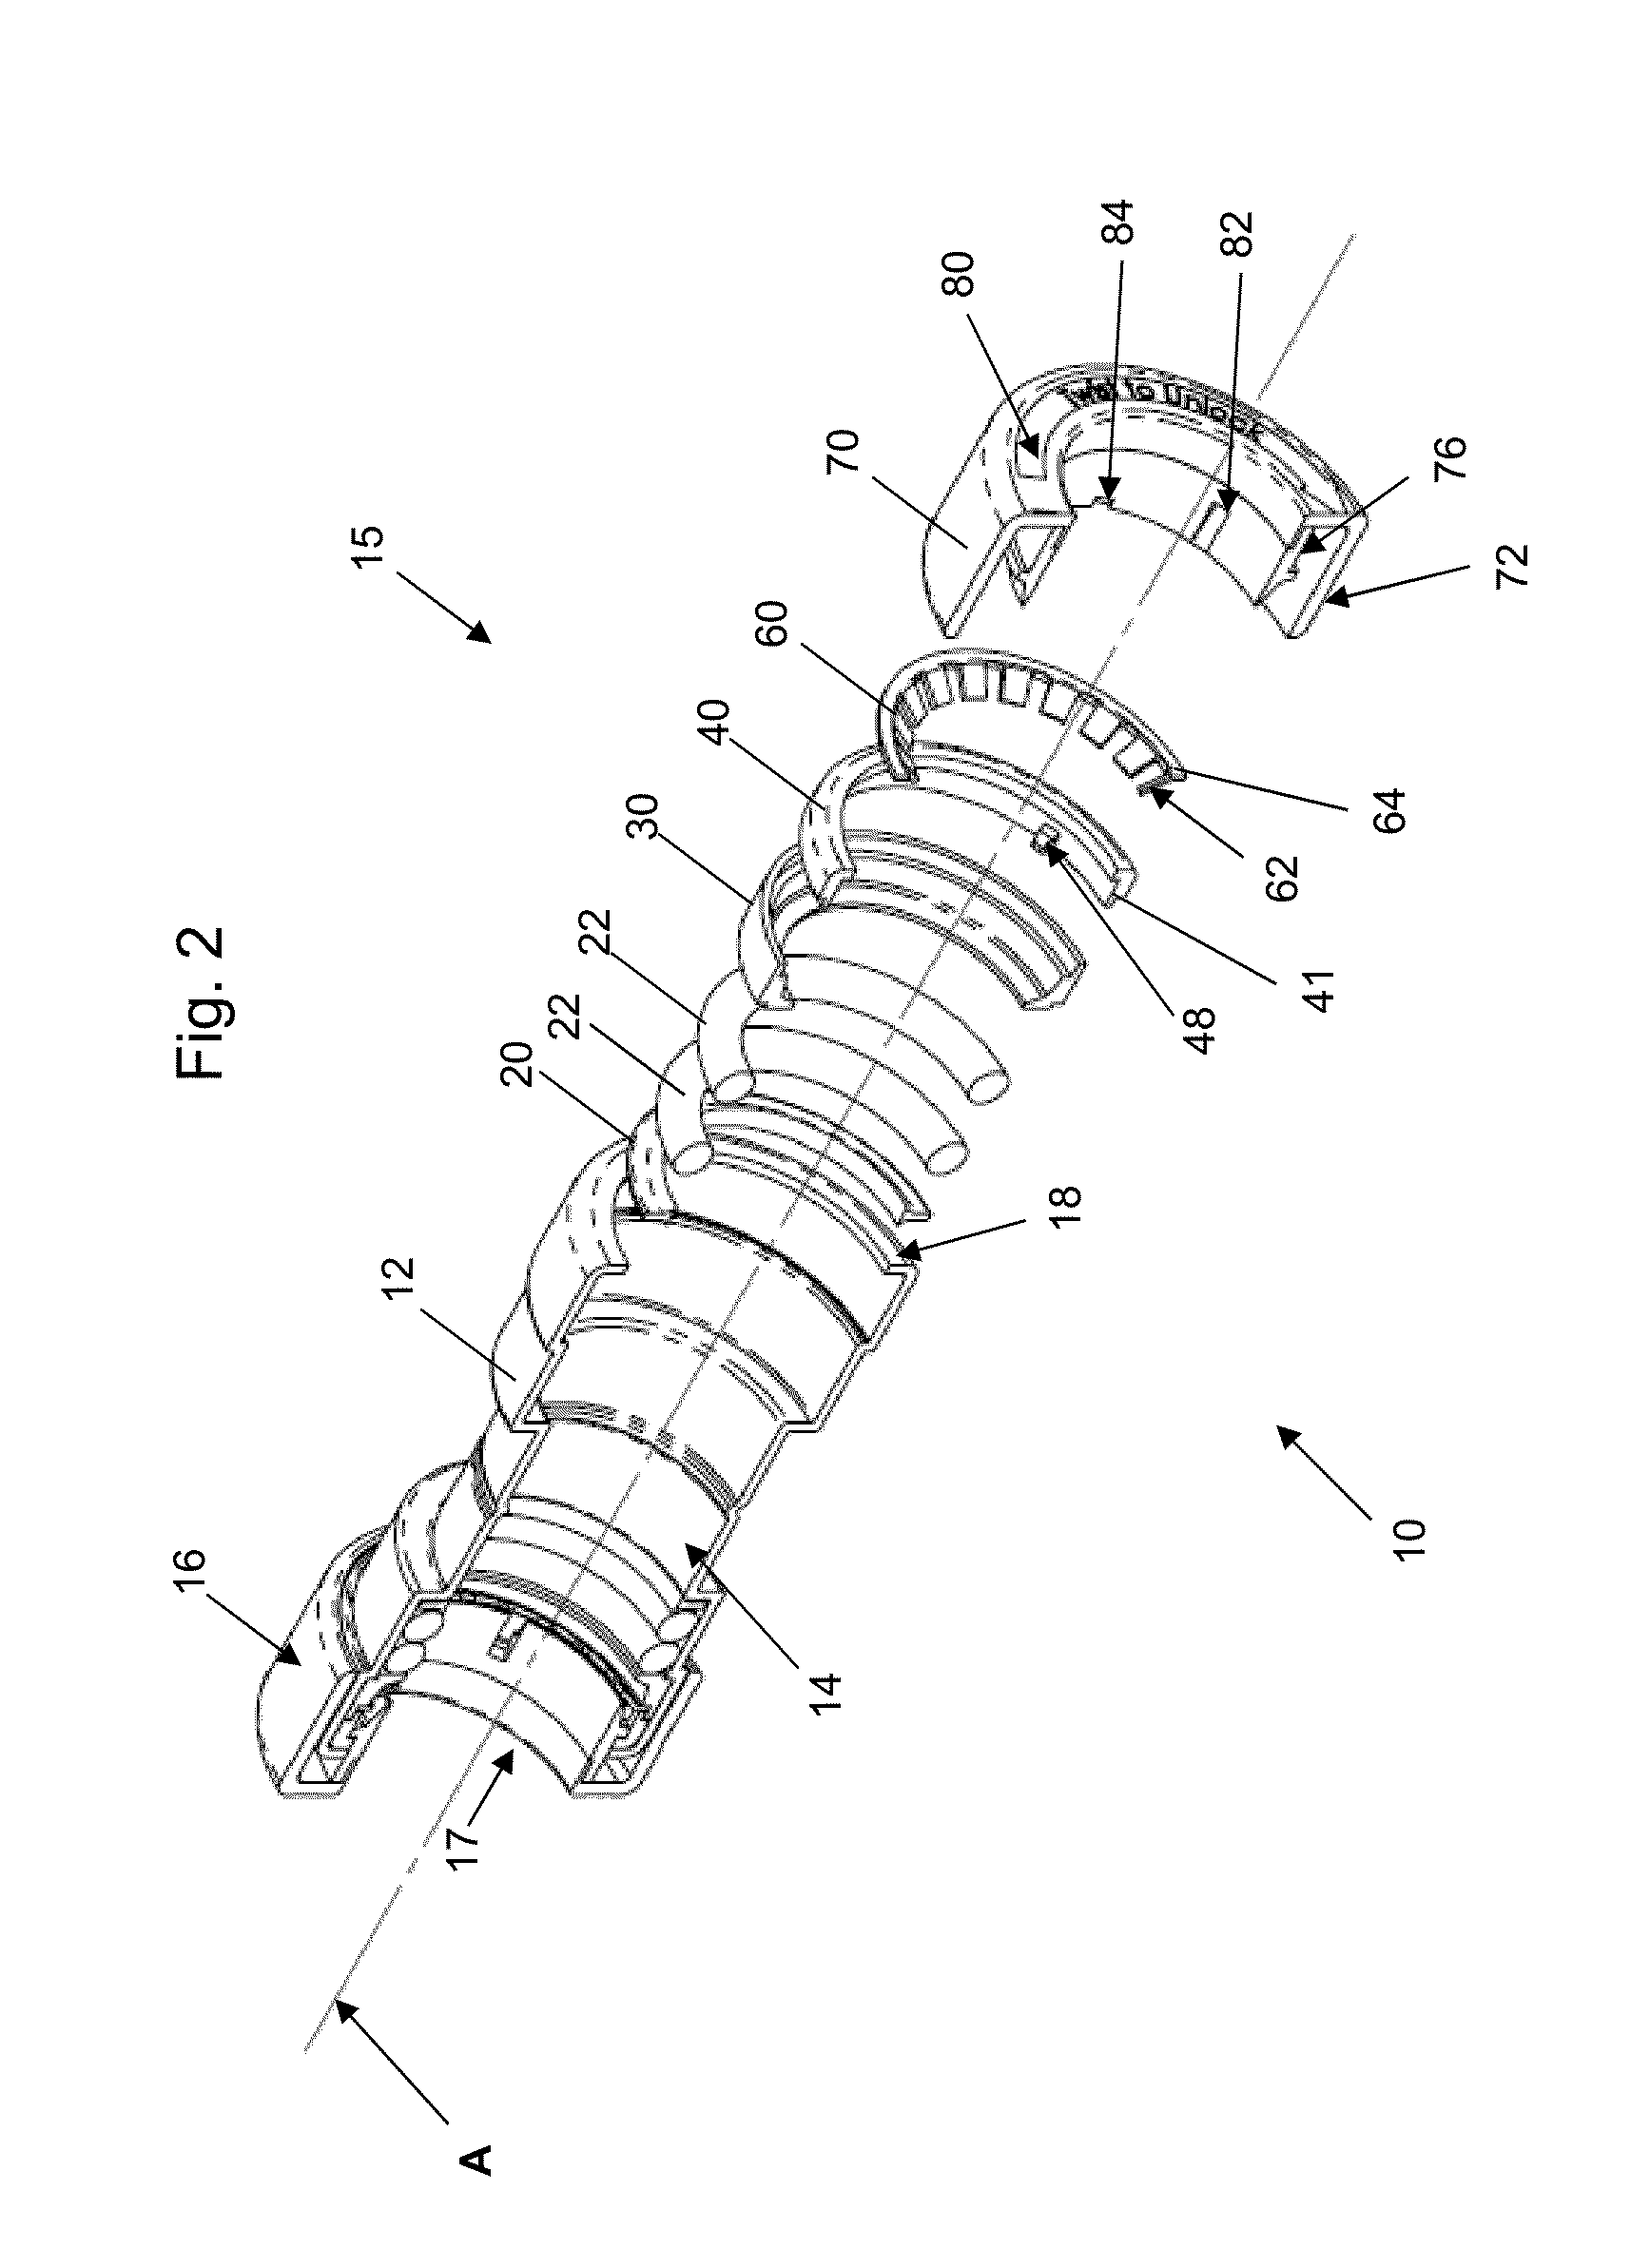 Push-to-Connect Fitting Integrated Packing Arrangement, Device and Methods